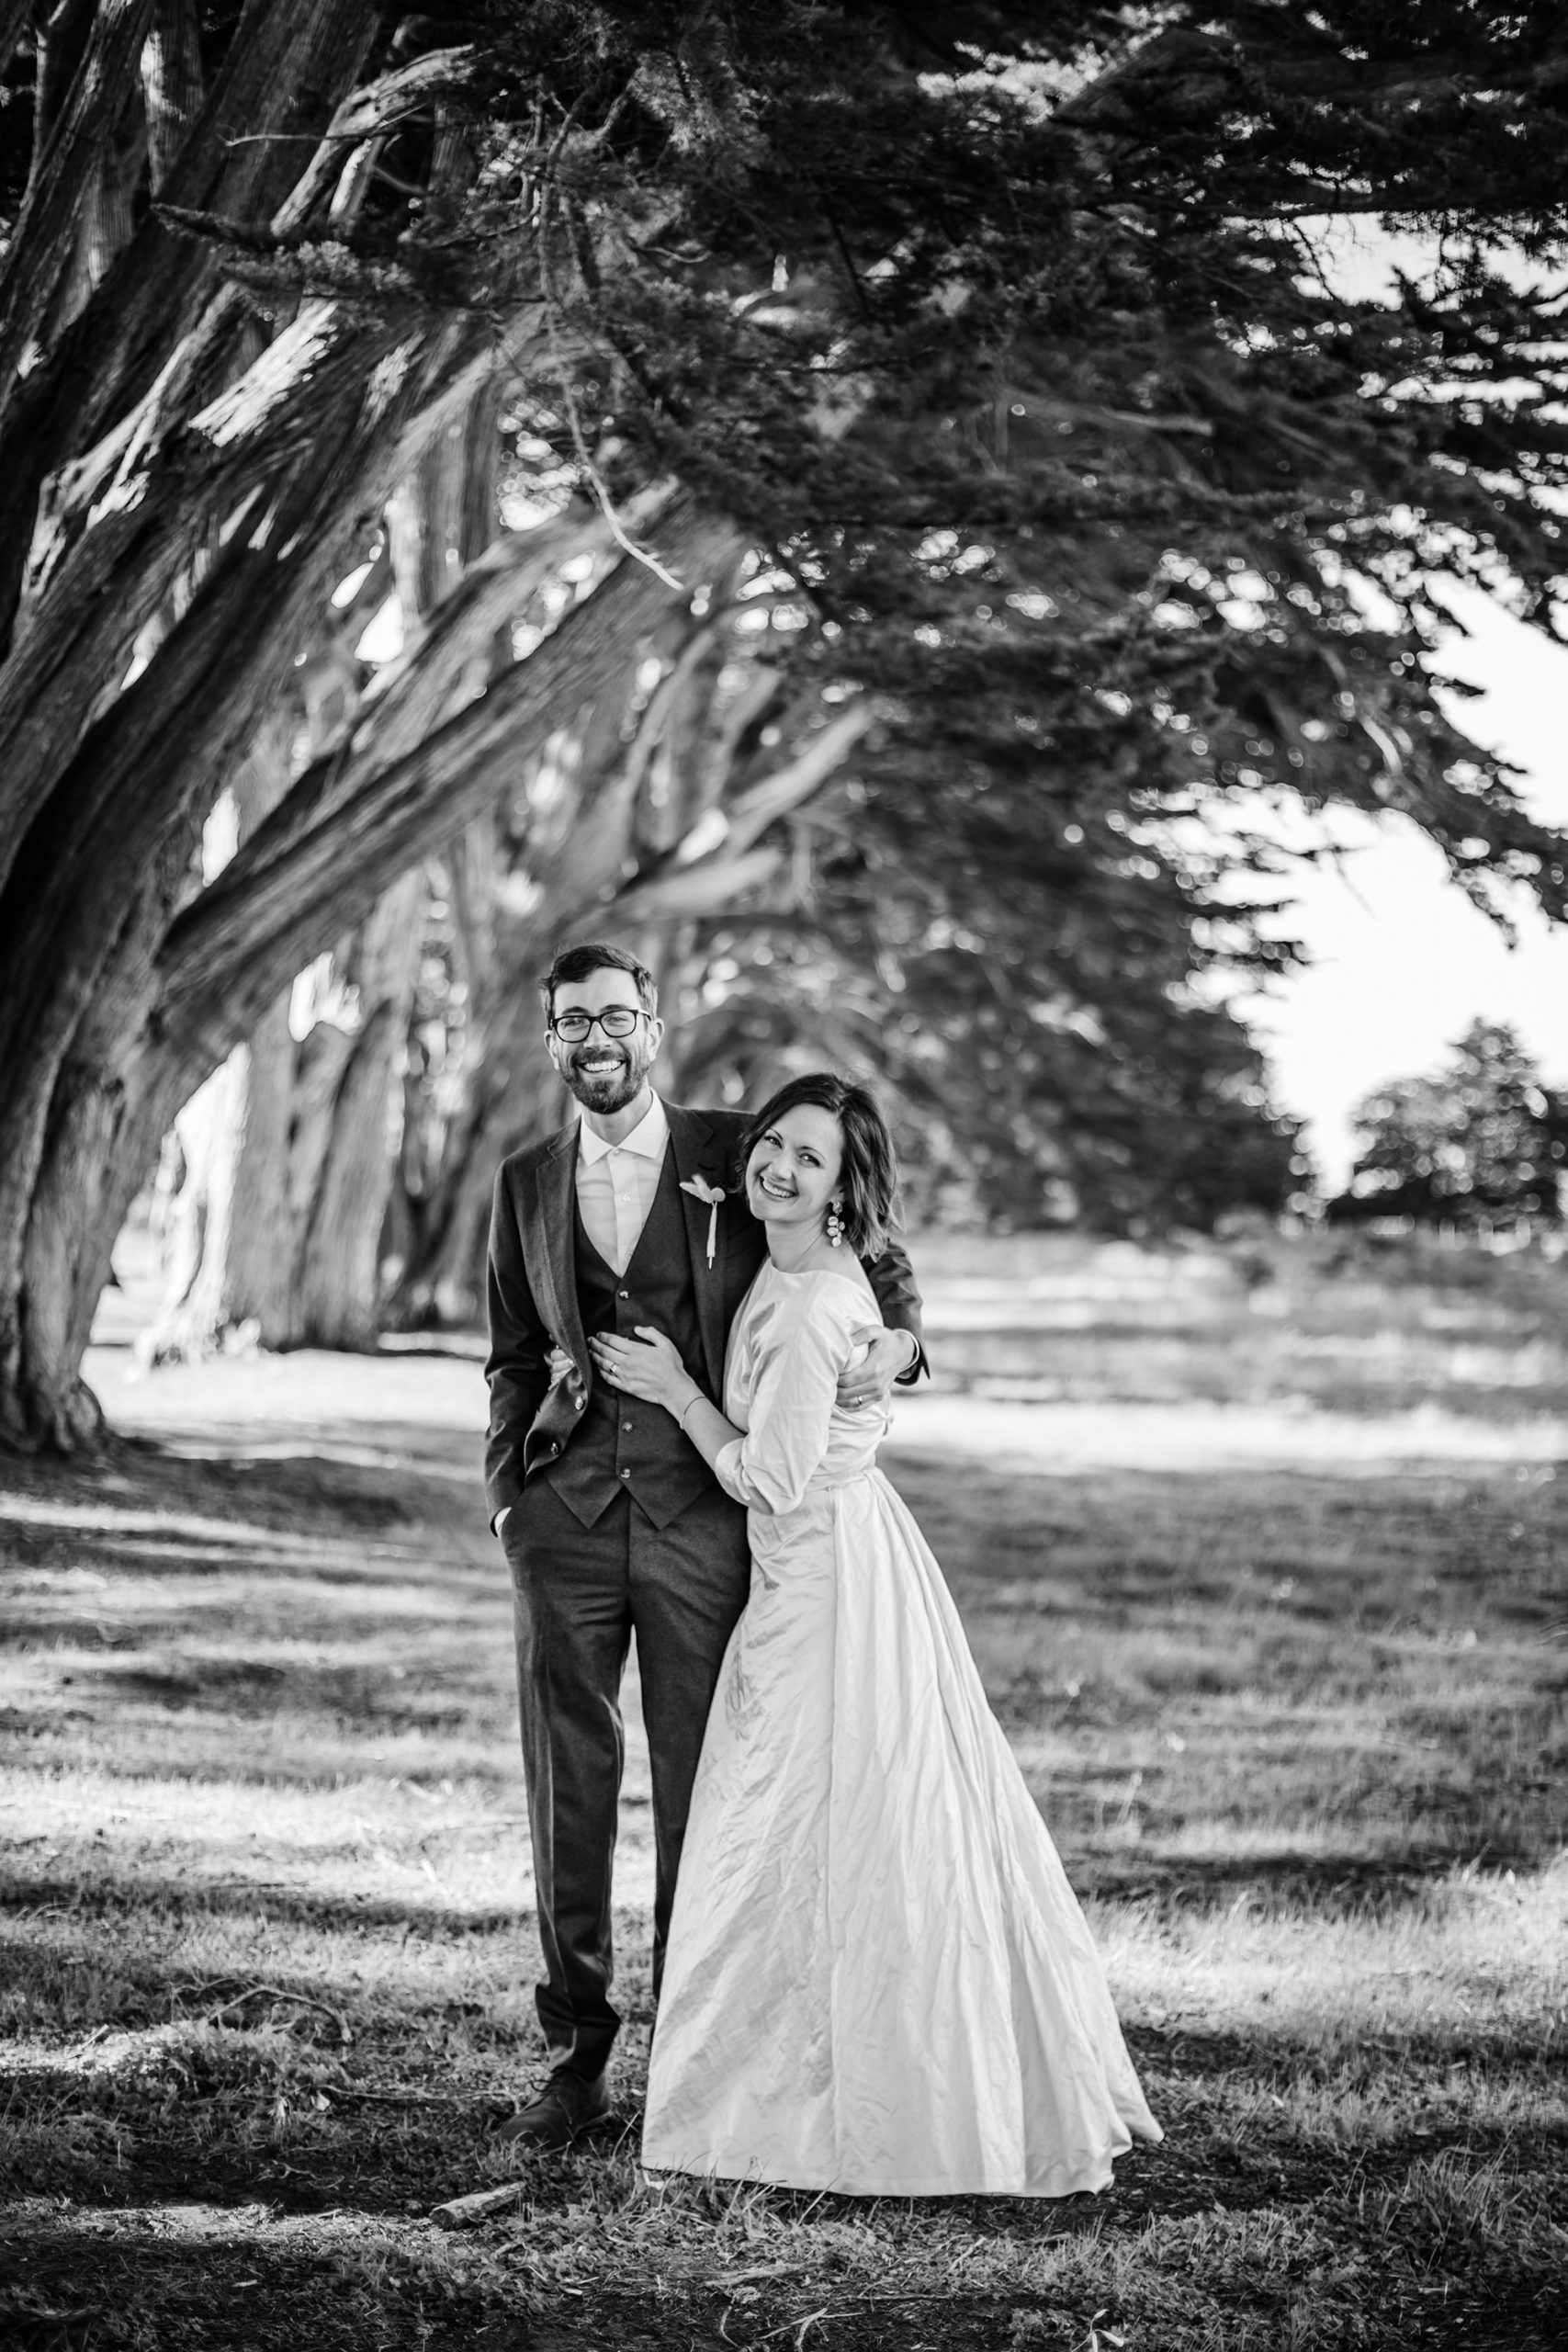 Groom and Bride having fun the Cypress Tree Tunnel for Point Reyes Elopement.